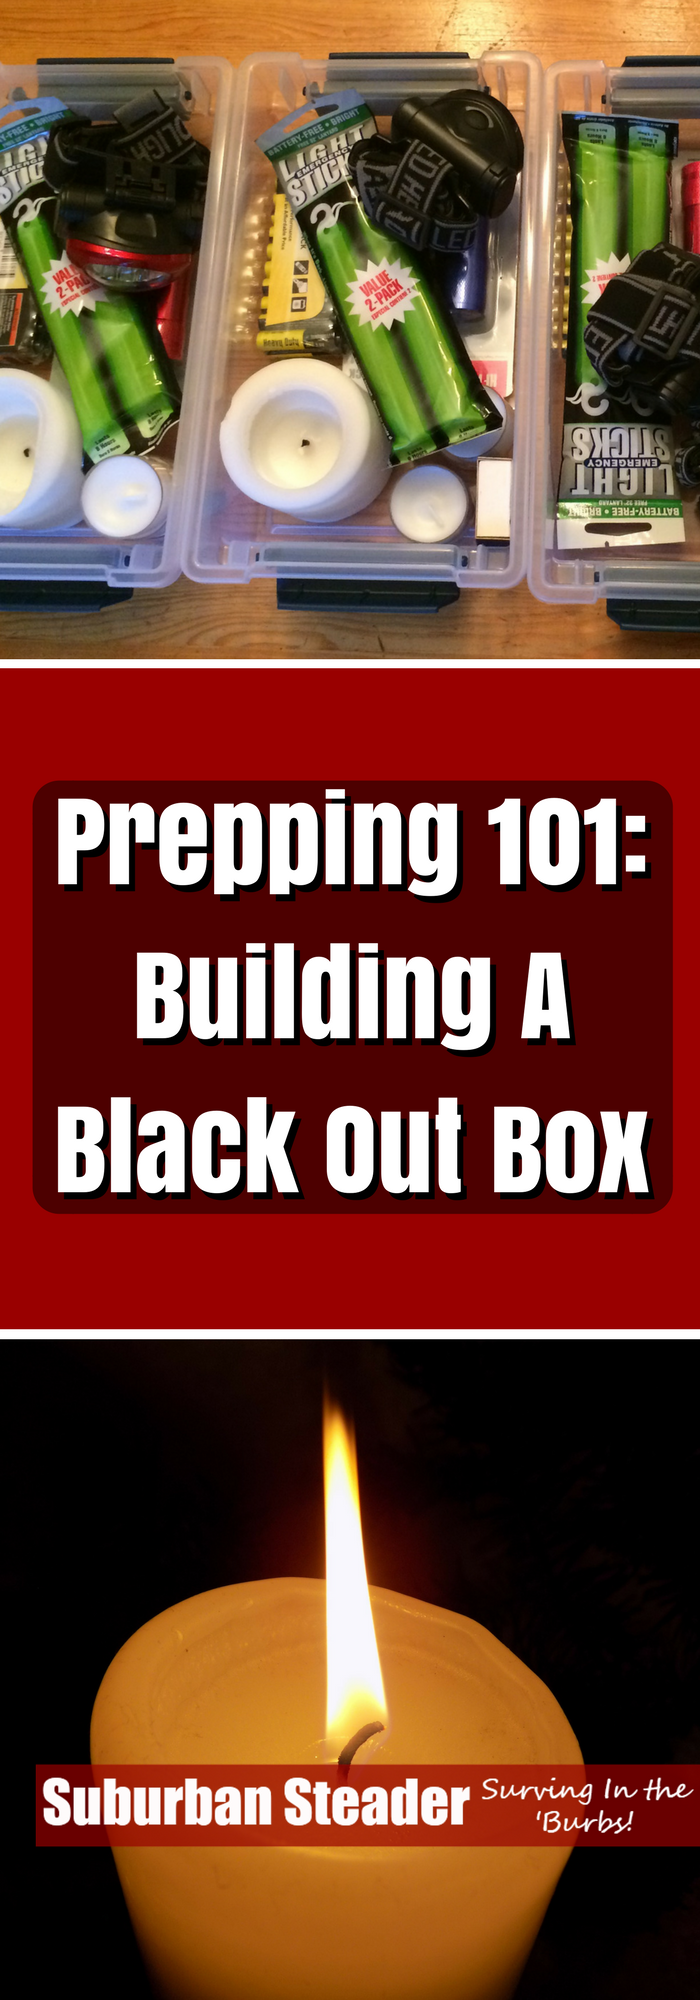 Prepping 101: Building a Black Out Box